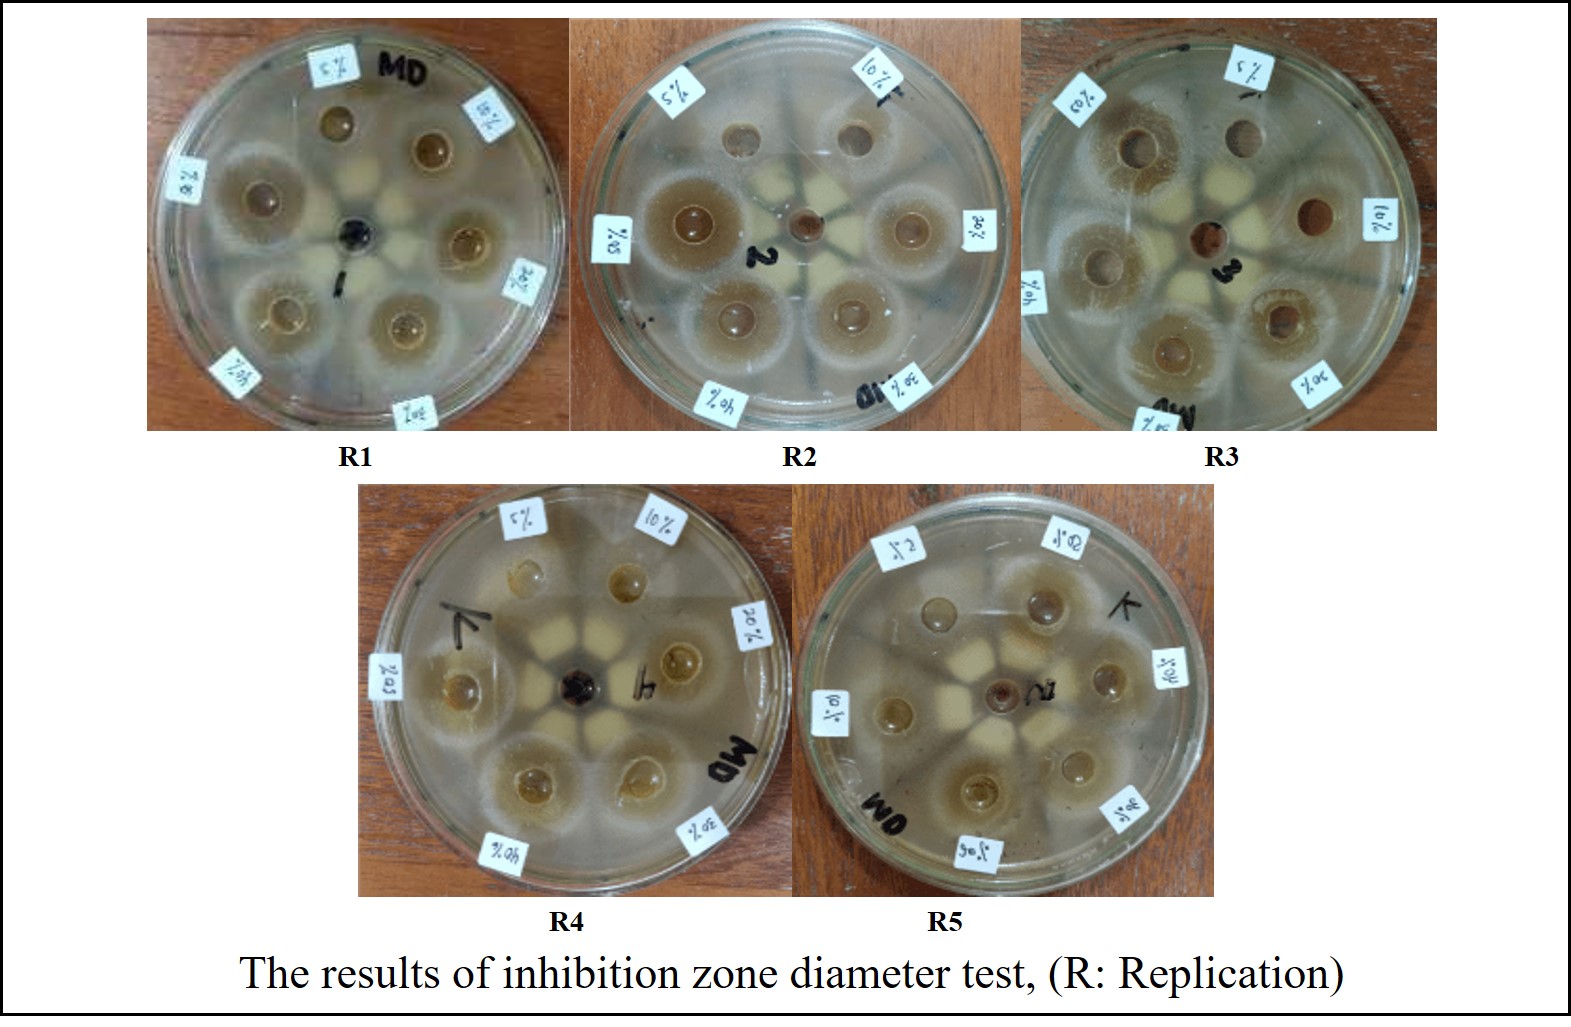 The results of inhibition zone diameter test, (R: Replication)